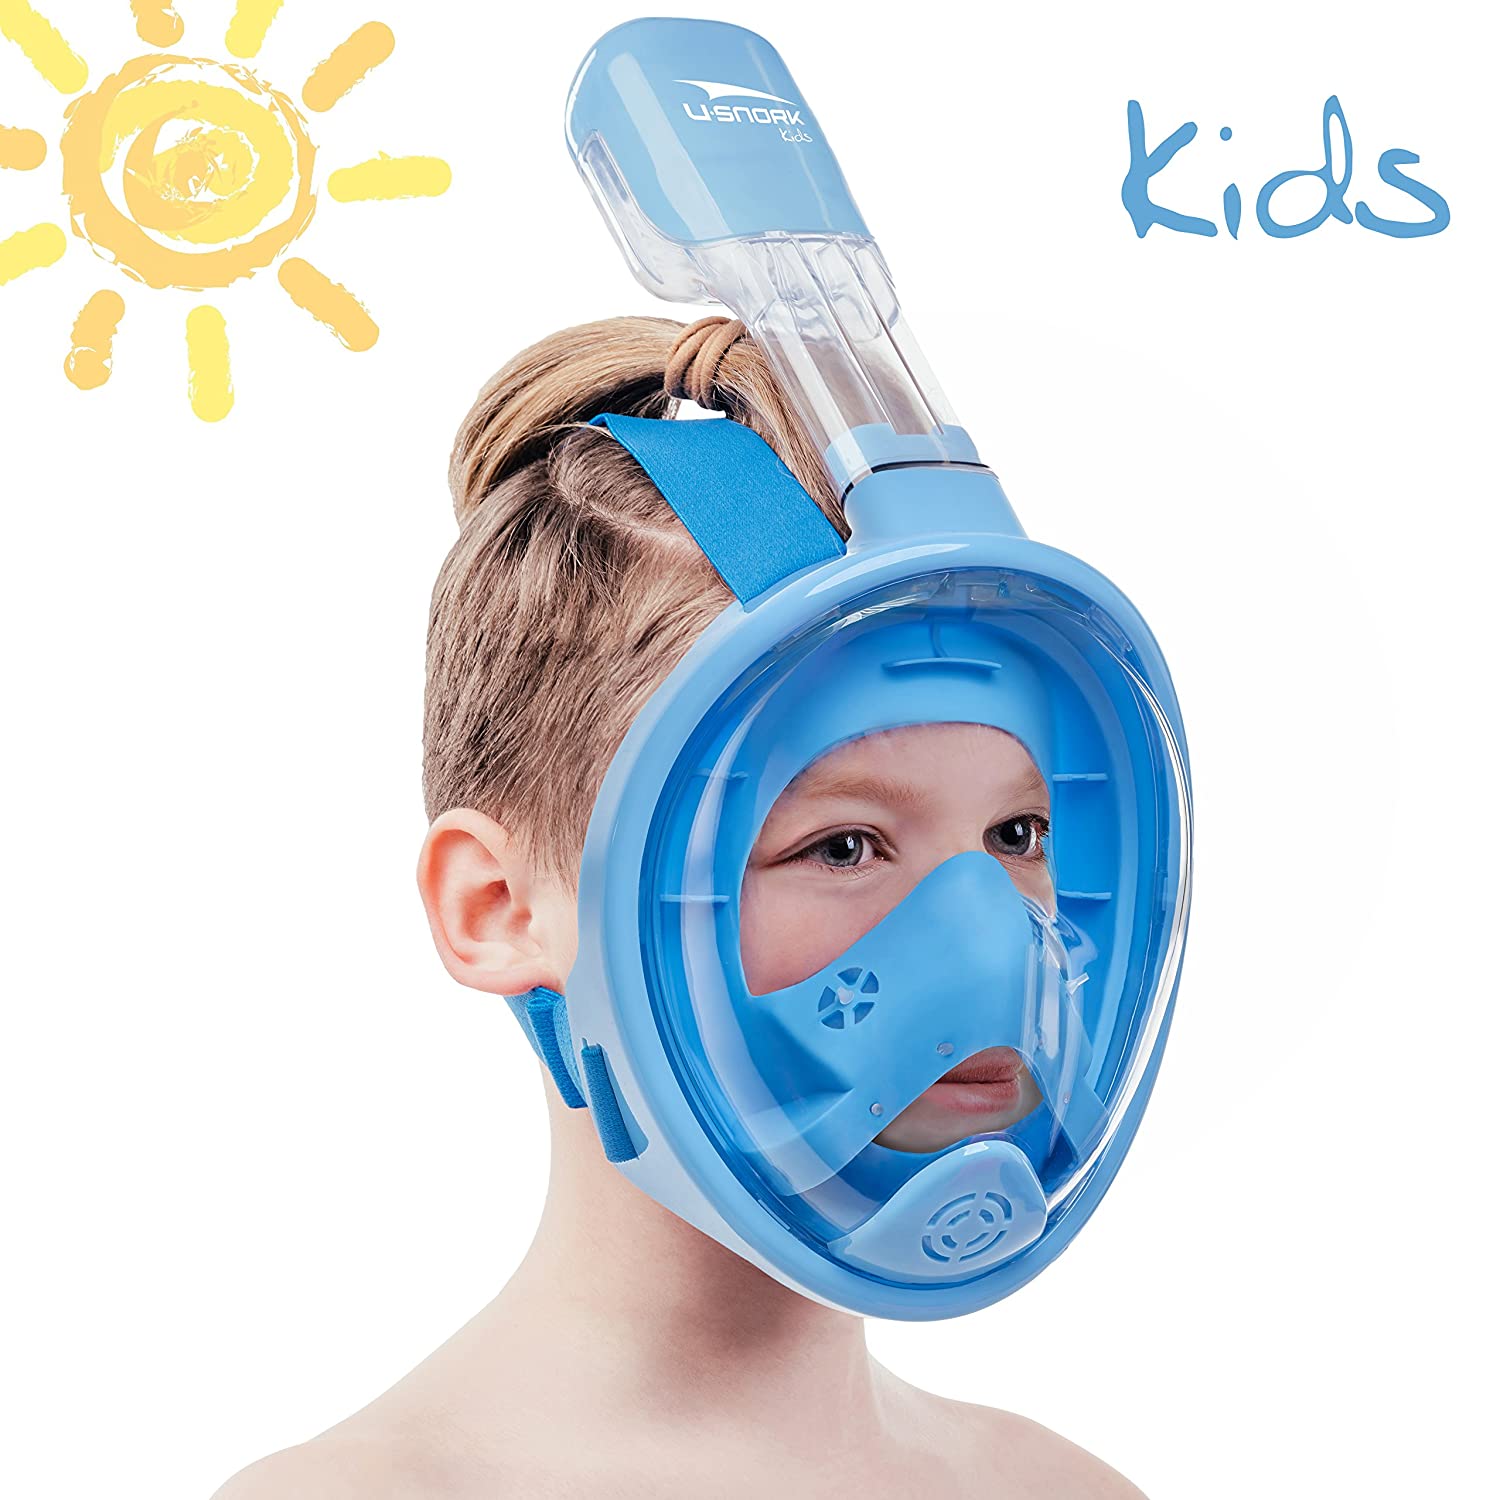 Full Face Snorkel Mask for Kids and Adults - Anti-Fog and Anti-Leak Easybreath Snorkeling Gear